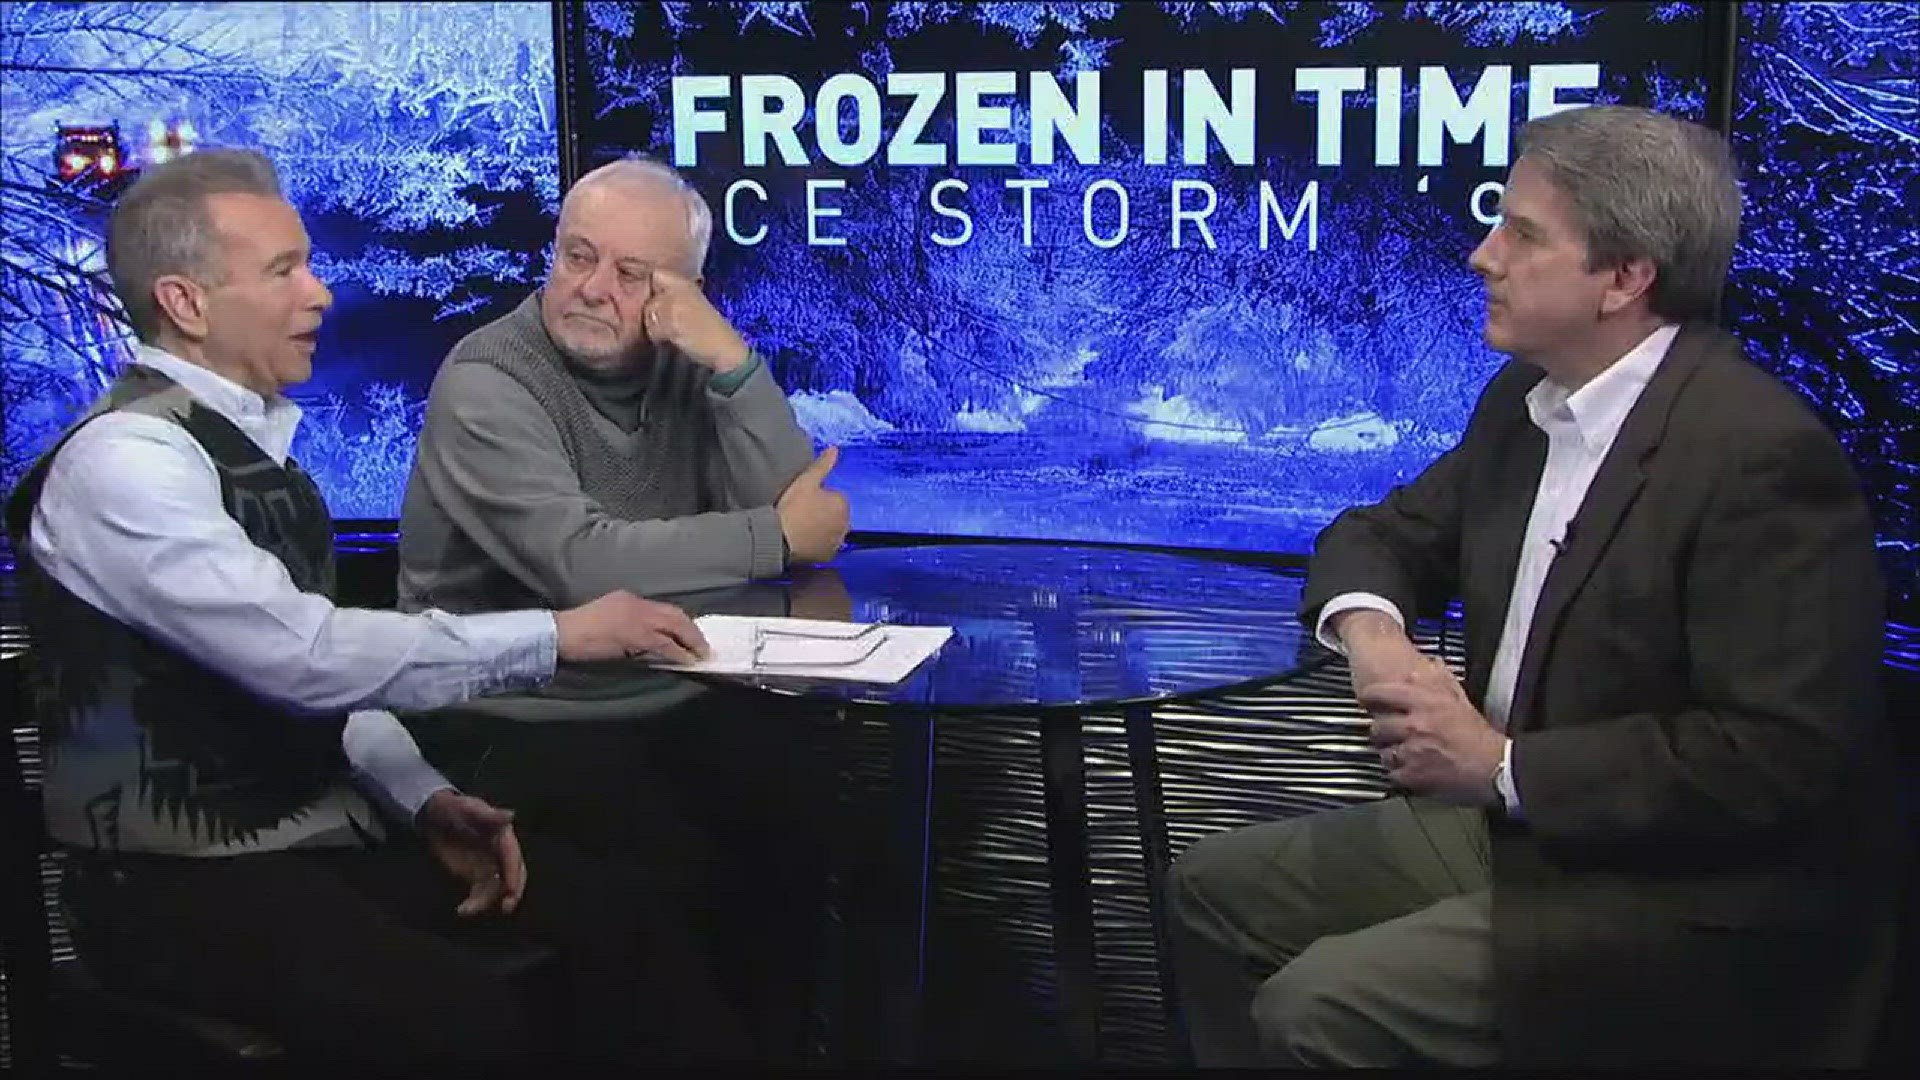 Two NEWS CENTER legends return to talk about the amazing ice storm of 1998